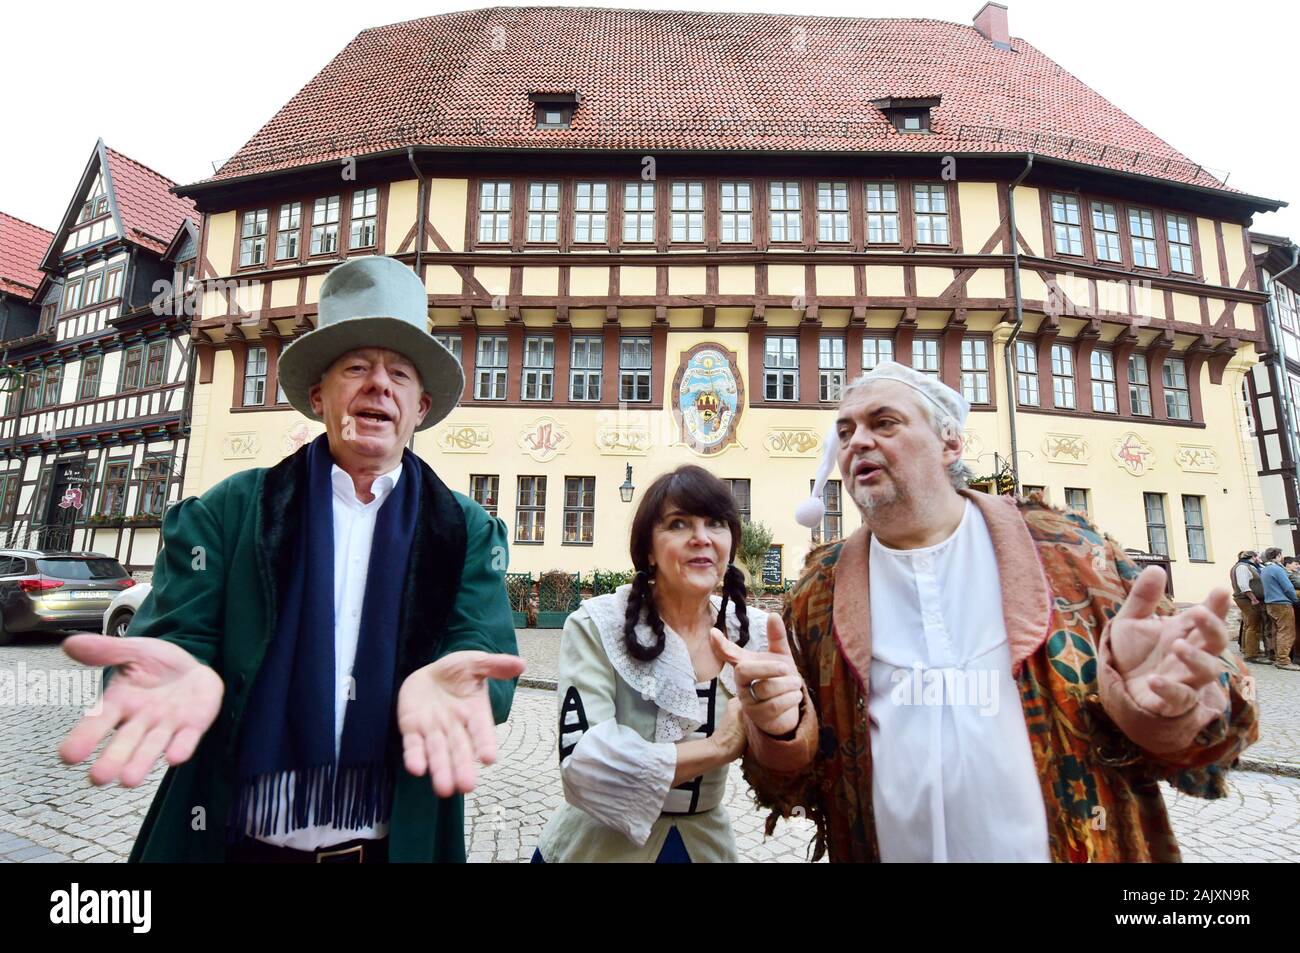 03 January 2020, Saxony-Anhalt, Stolberg: In front of the over 550-year-old town hall in the Harz half-timbered town of Stolberg, known as the 'curiosity of architecture', are the actors Mario (r) and Christiane Jantosch (M) from the AllerweltTheatre with the local mayor Ulrich Franke (l) as teacher Lämpel, widow Bolte and tailor Böck from the Wilhelm Busch Theatre programme. Together with the approximately 1,100 inhabitants of Stolberg, the three are delighted to have won first place in the competition for the title 'Germany's most beautiful village'. Announced by the online travel magazine T Stock Photo